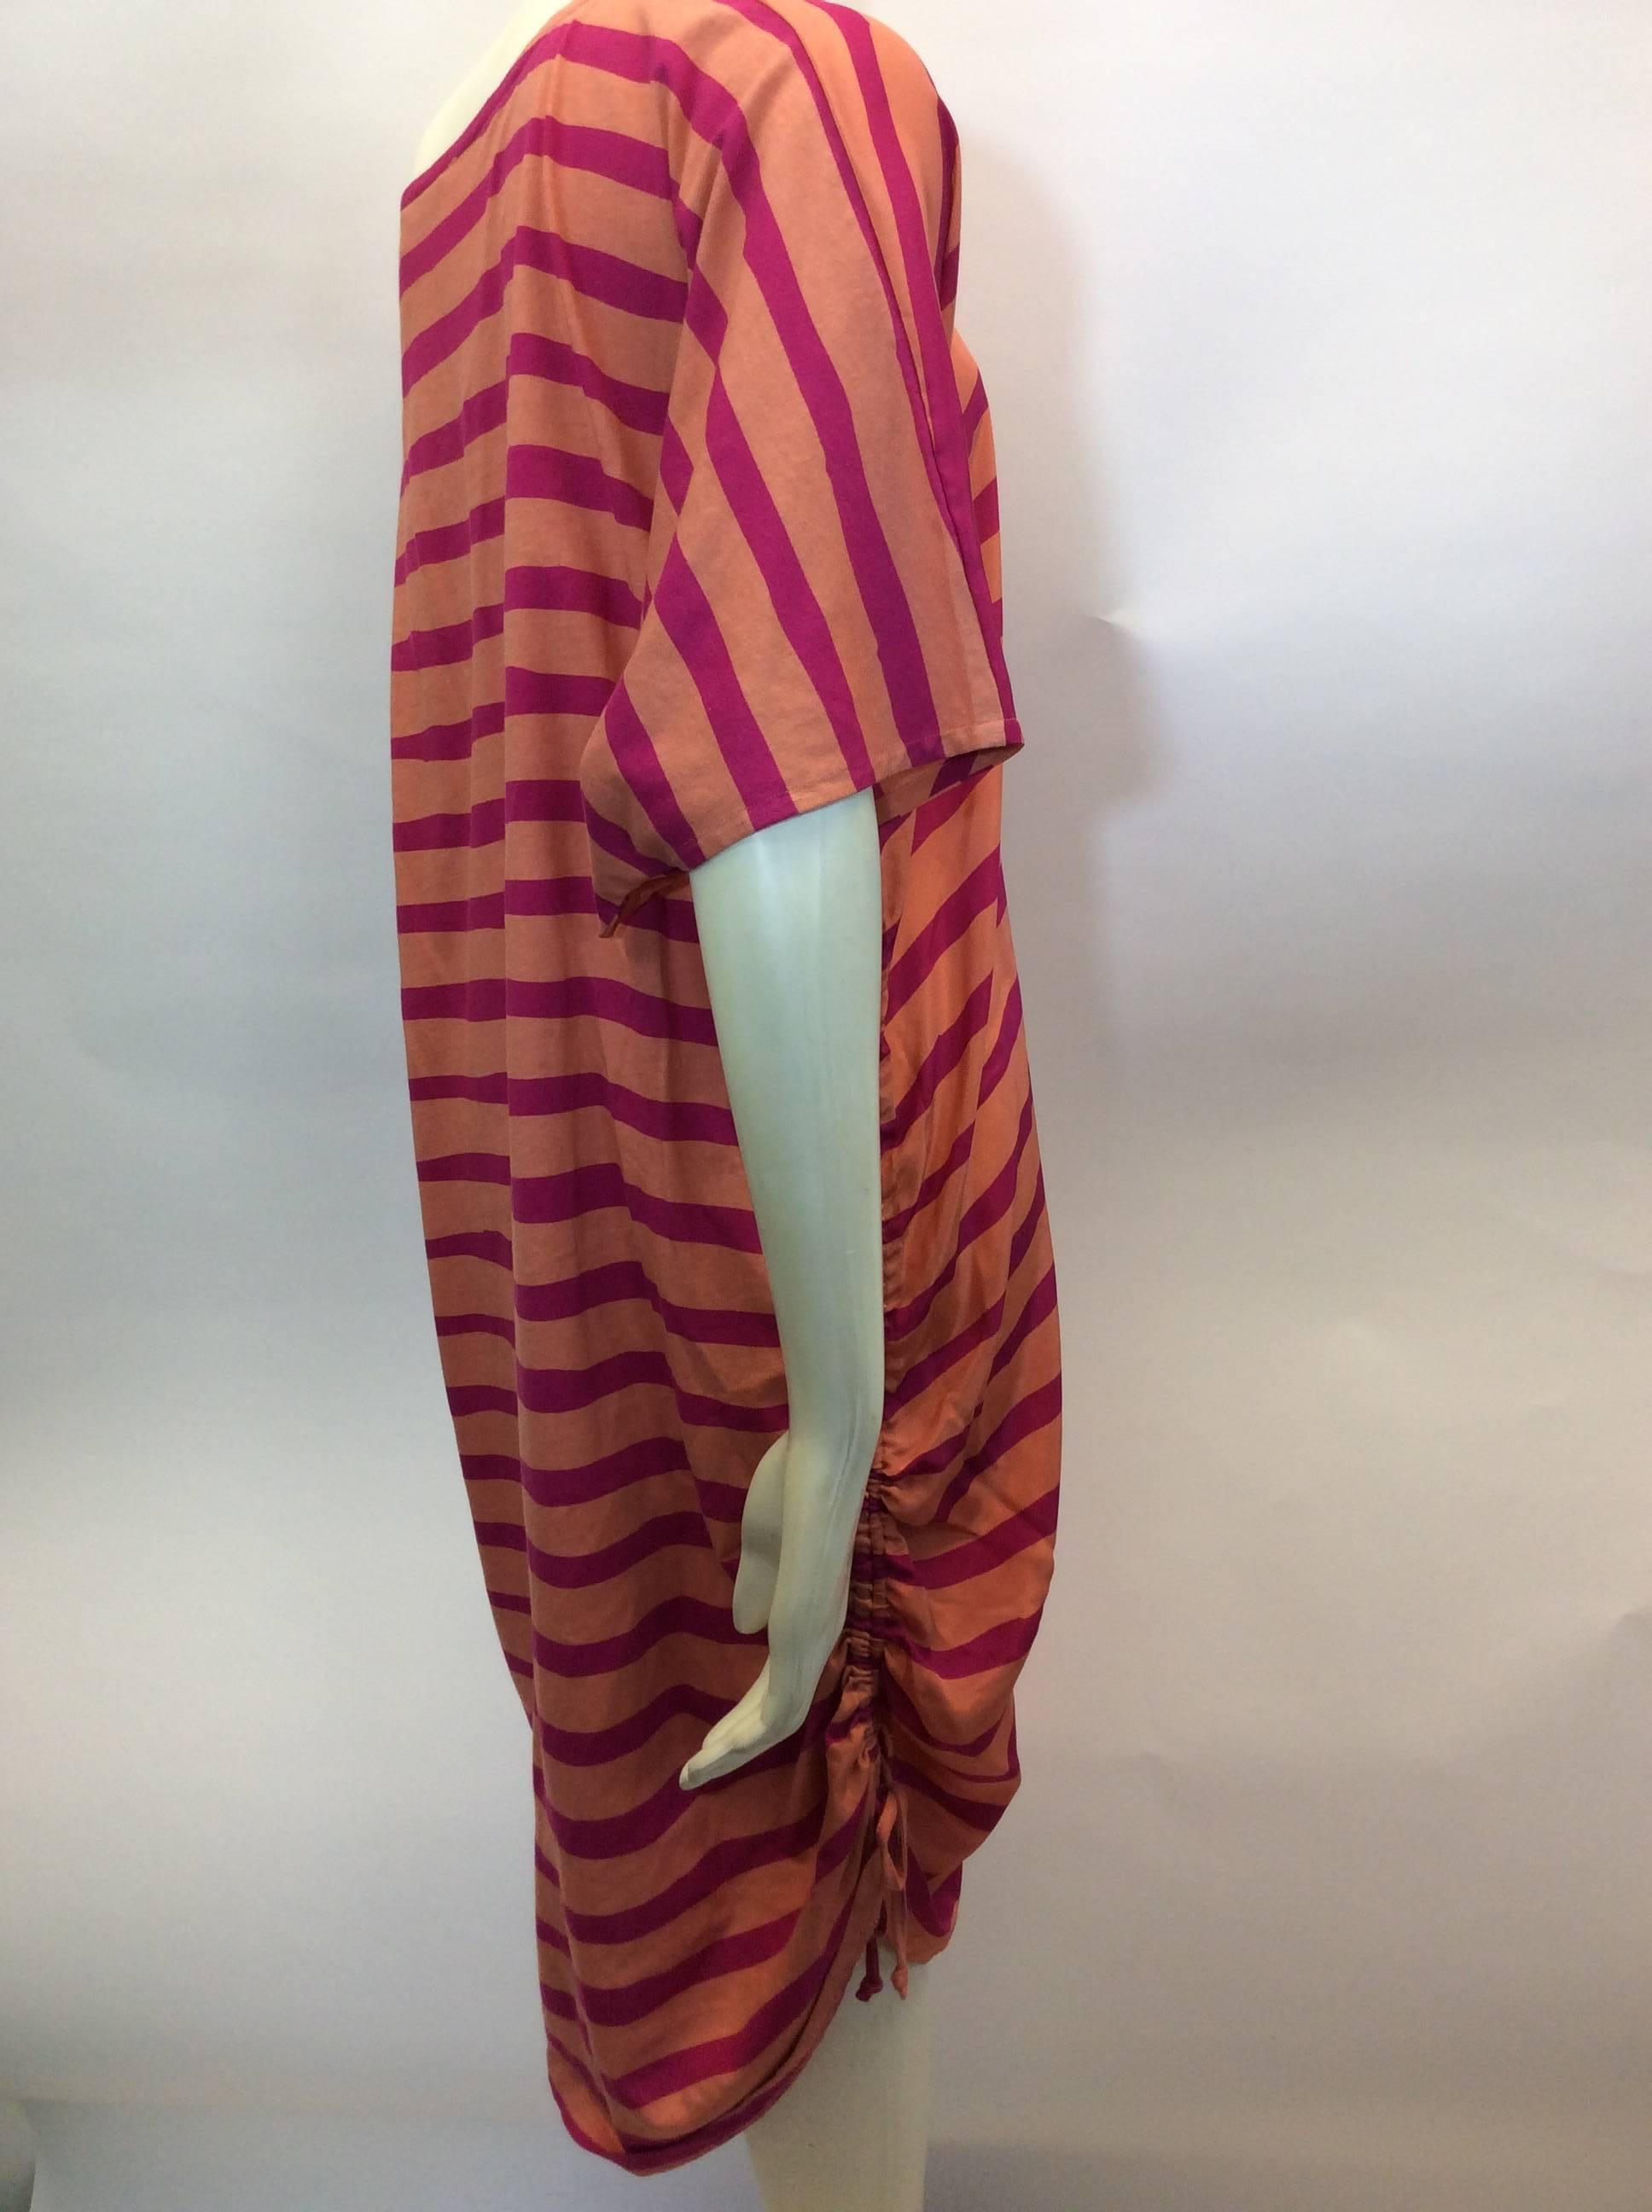 Sonia By Sonia Rykiel Coral Pink Stripe Silk Tunic
Cinched sides
$165
Made in China
Size Medium
100% silk front, 100% cotton back
